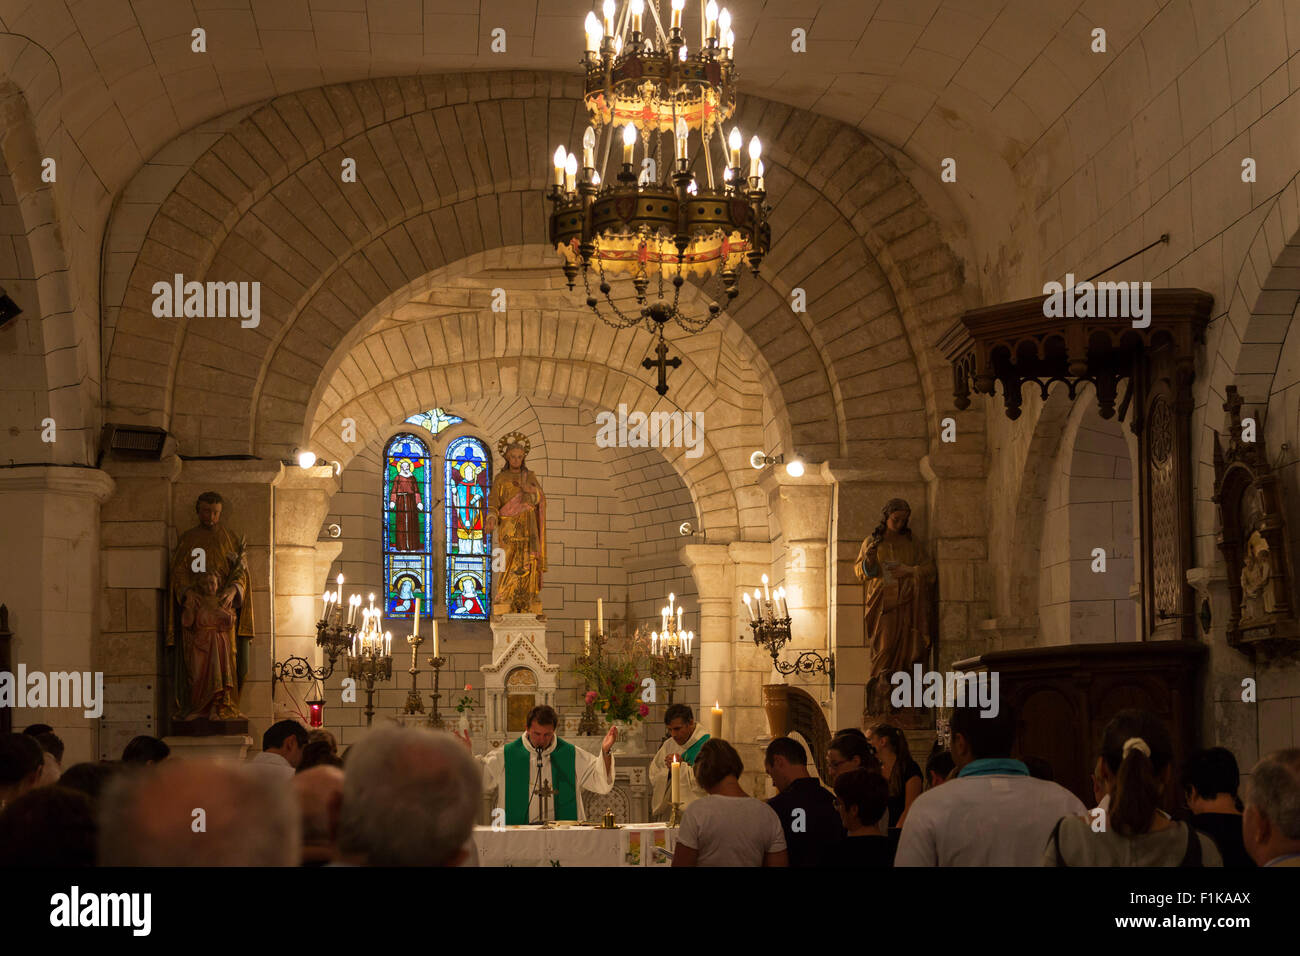 Catholic mass at the church of St. Cybardeaux, Charente Maritime, south west France Stock Photo